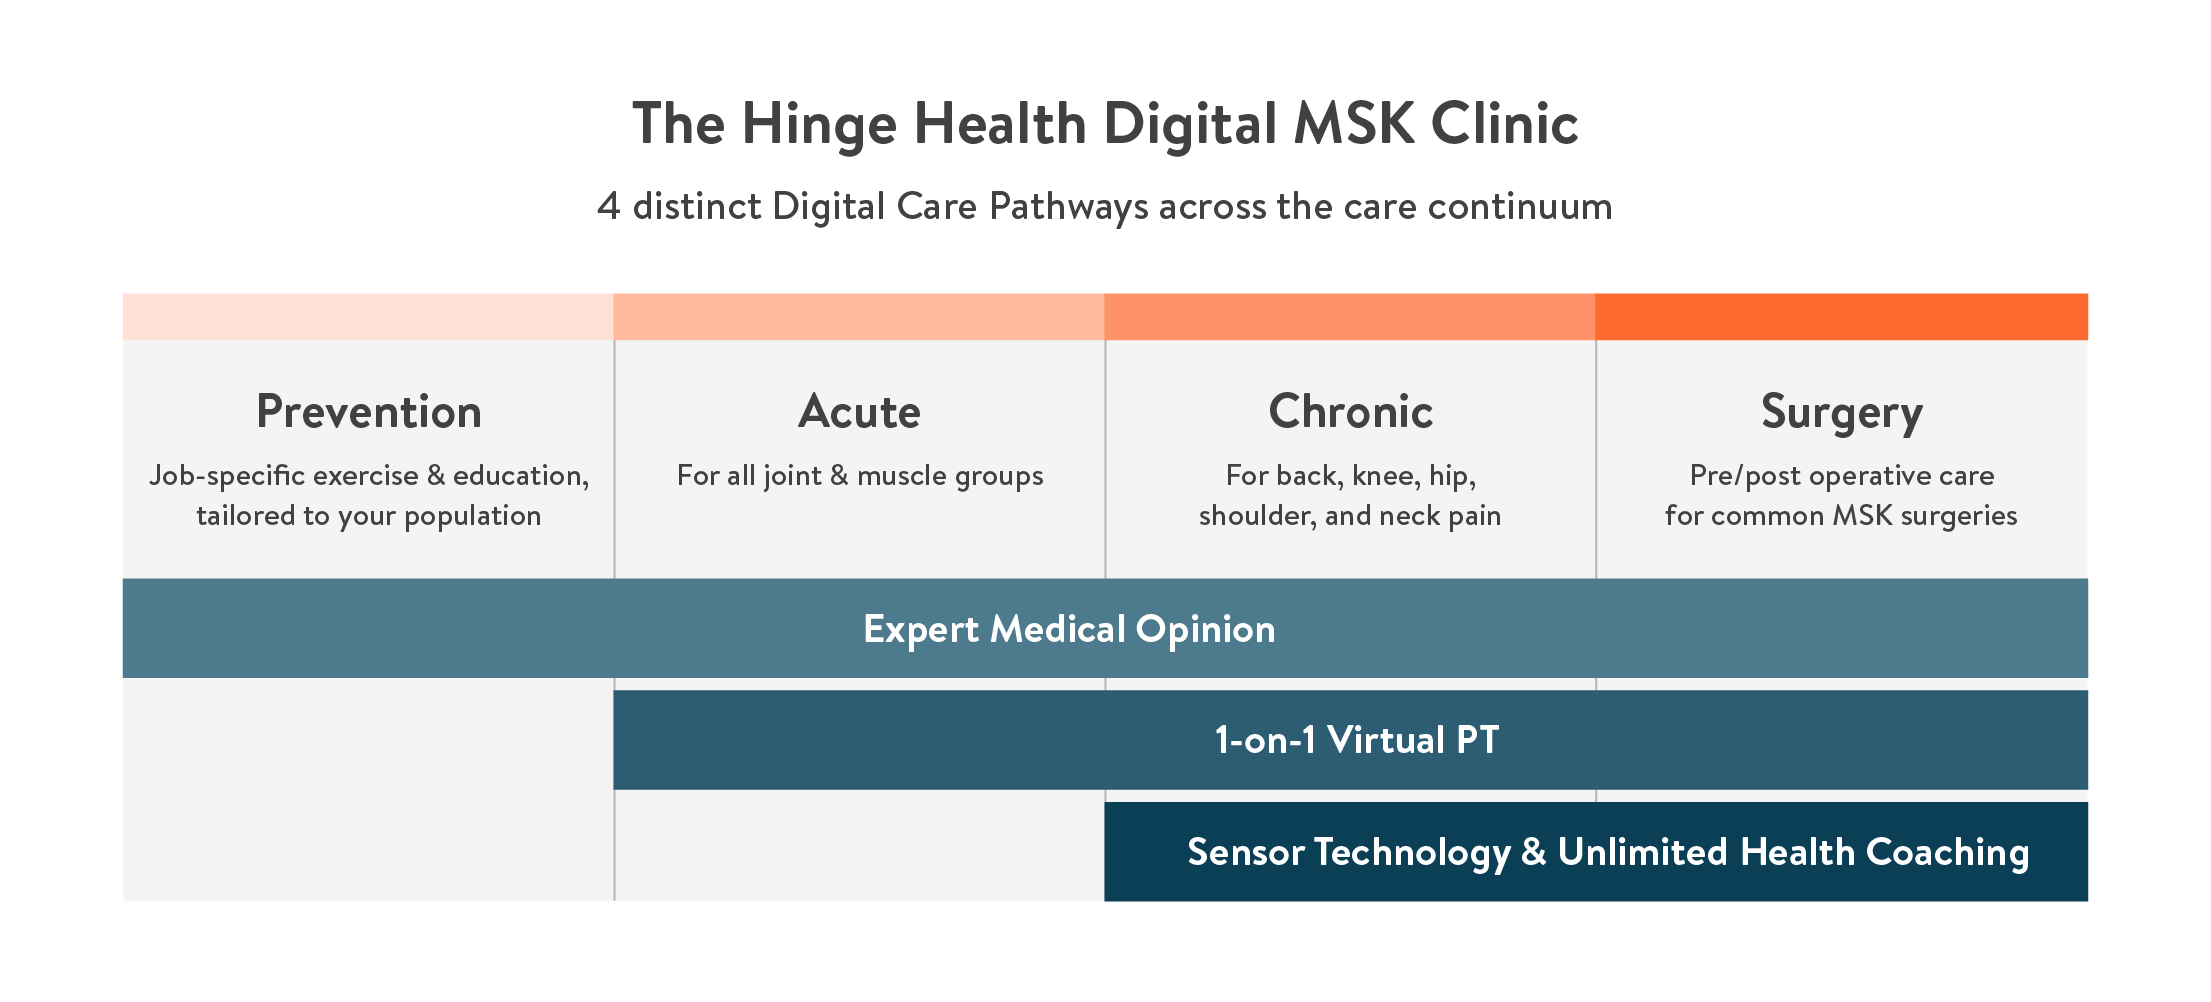 Covering the Full Continuum of MSK Care: Hinge Health’s New Digital MSK Clinic